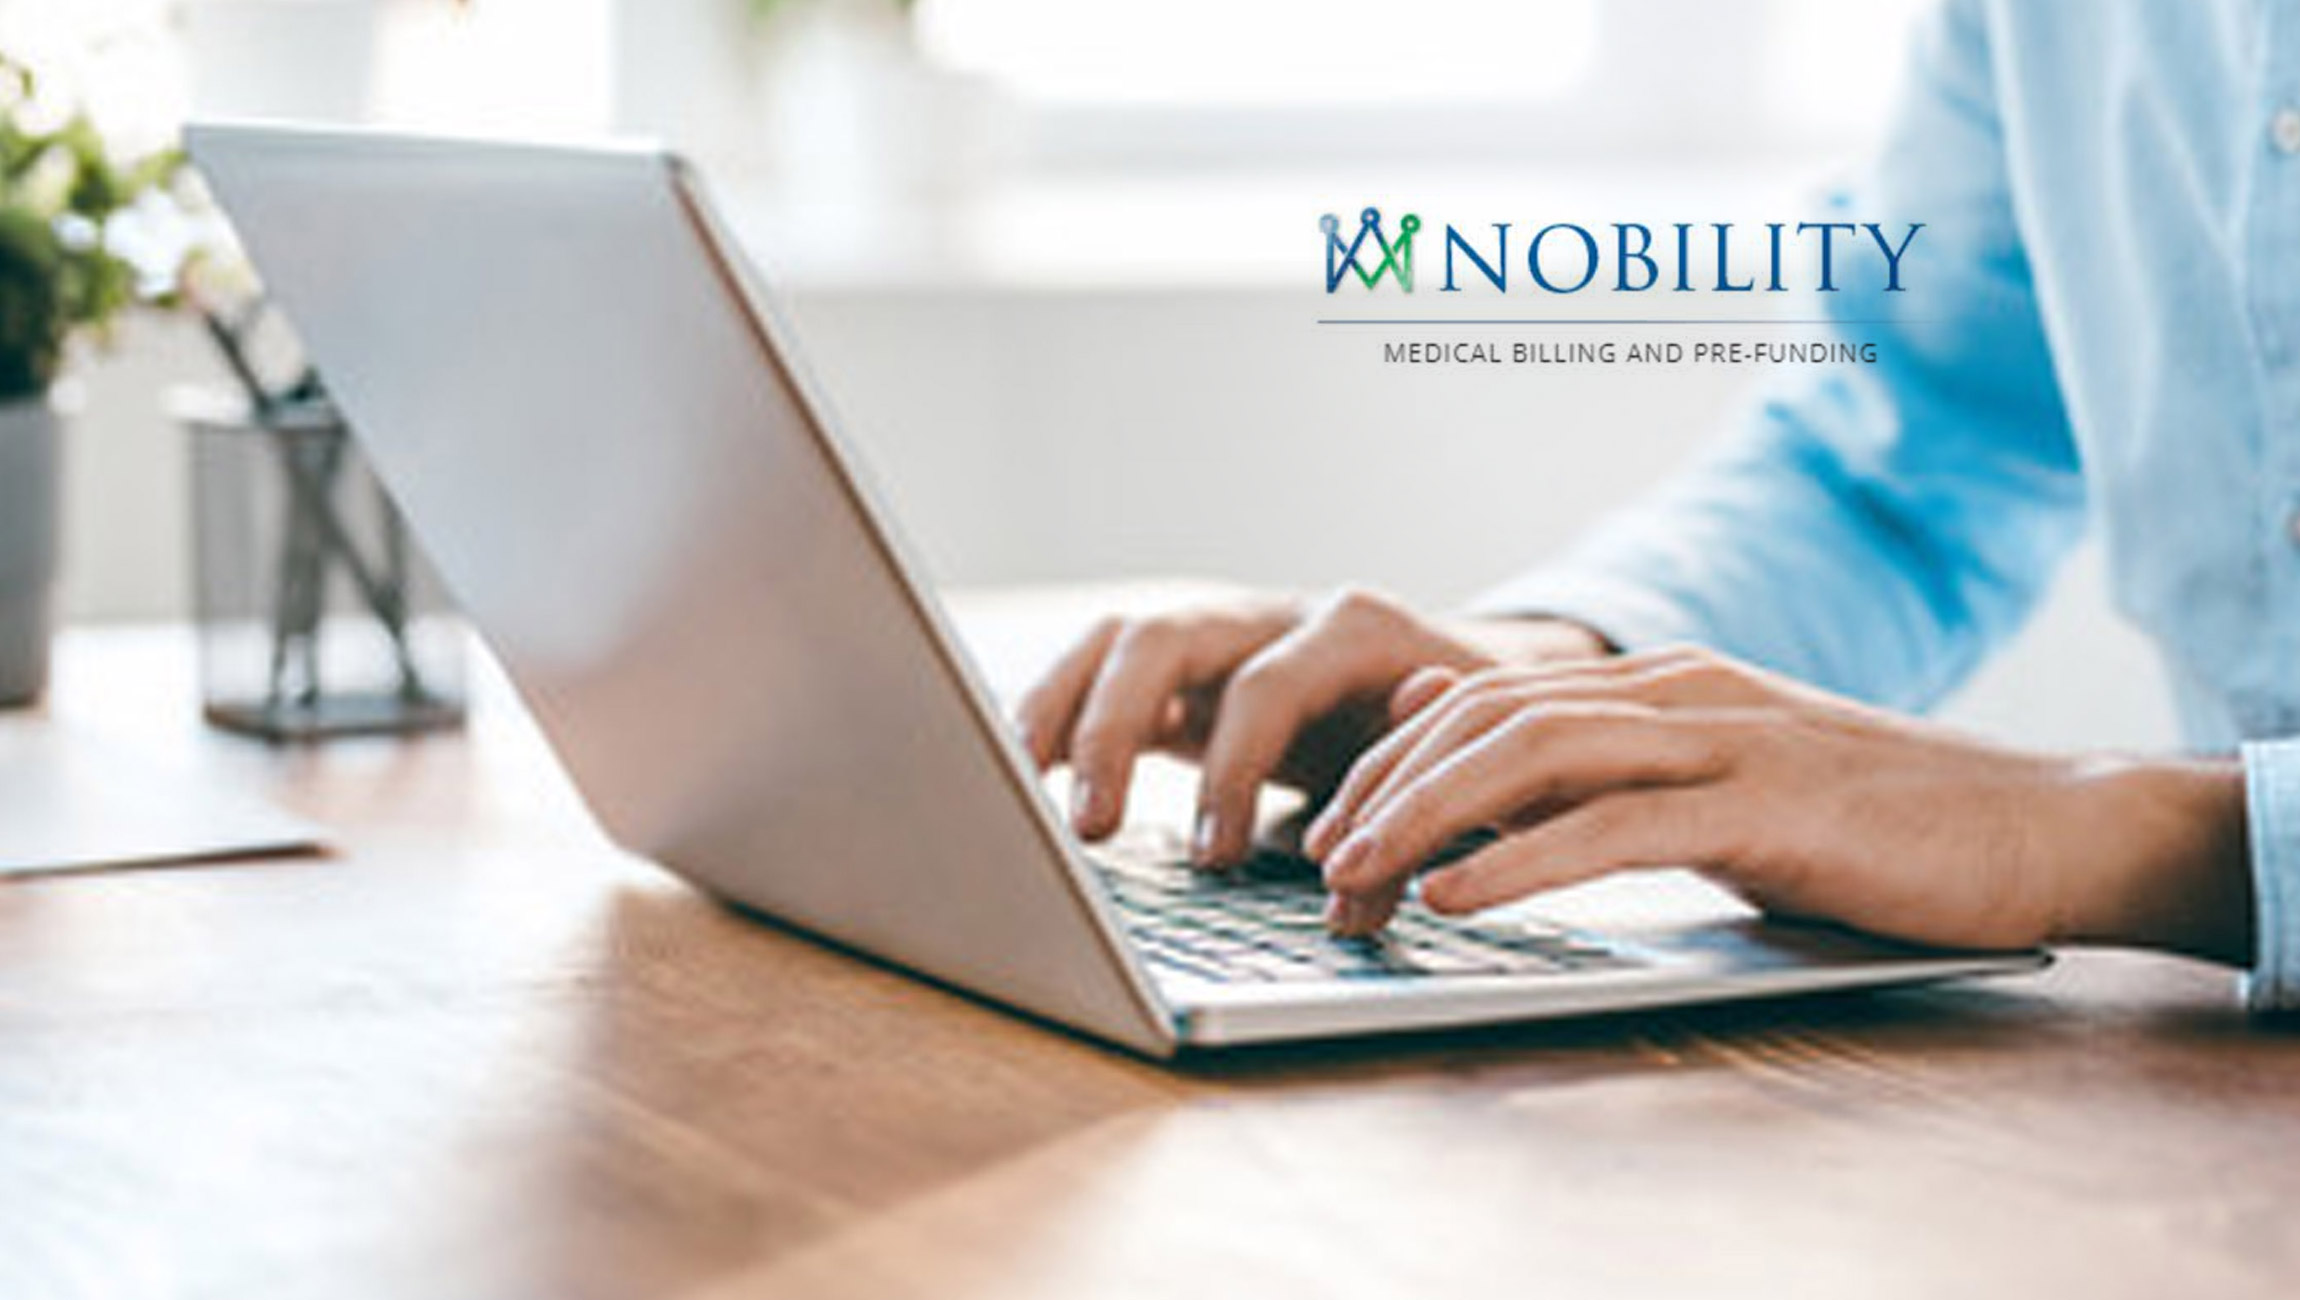 Nobility RCM launches new website to showcase expanded suite of services and its unique value proposition